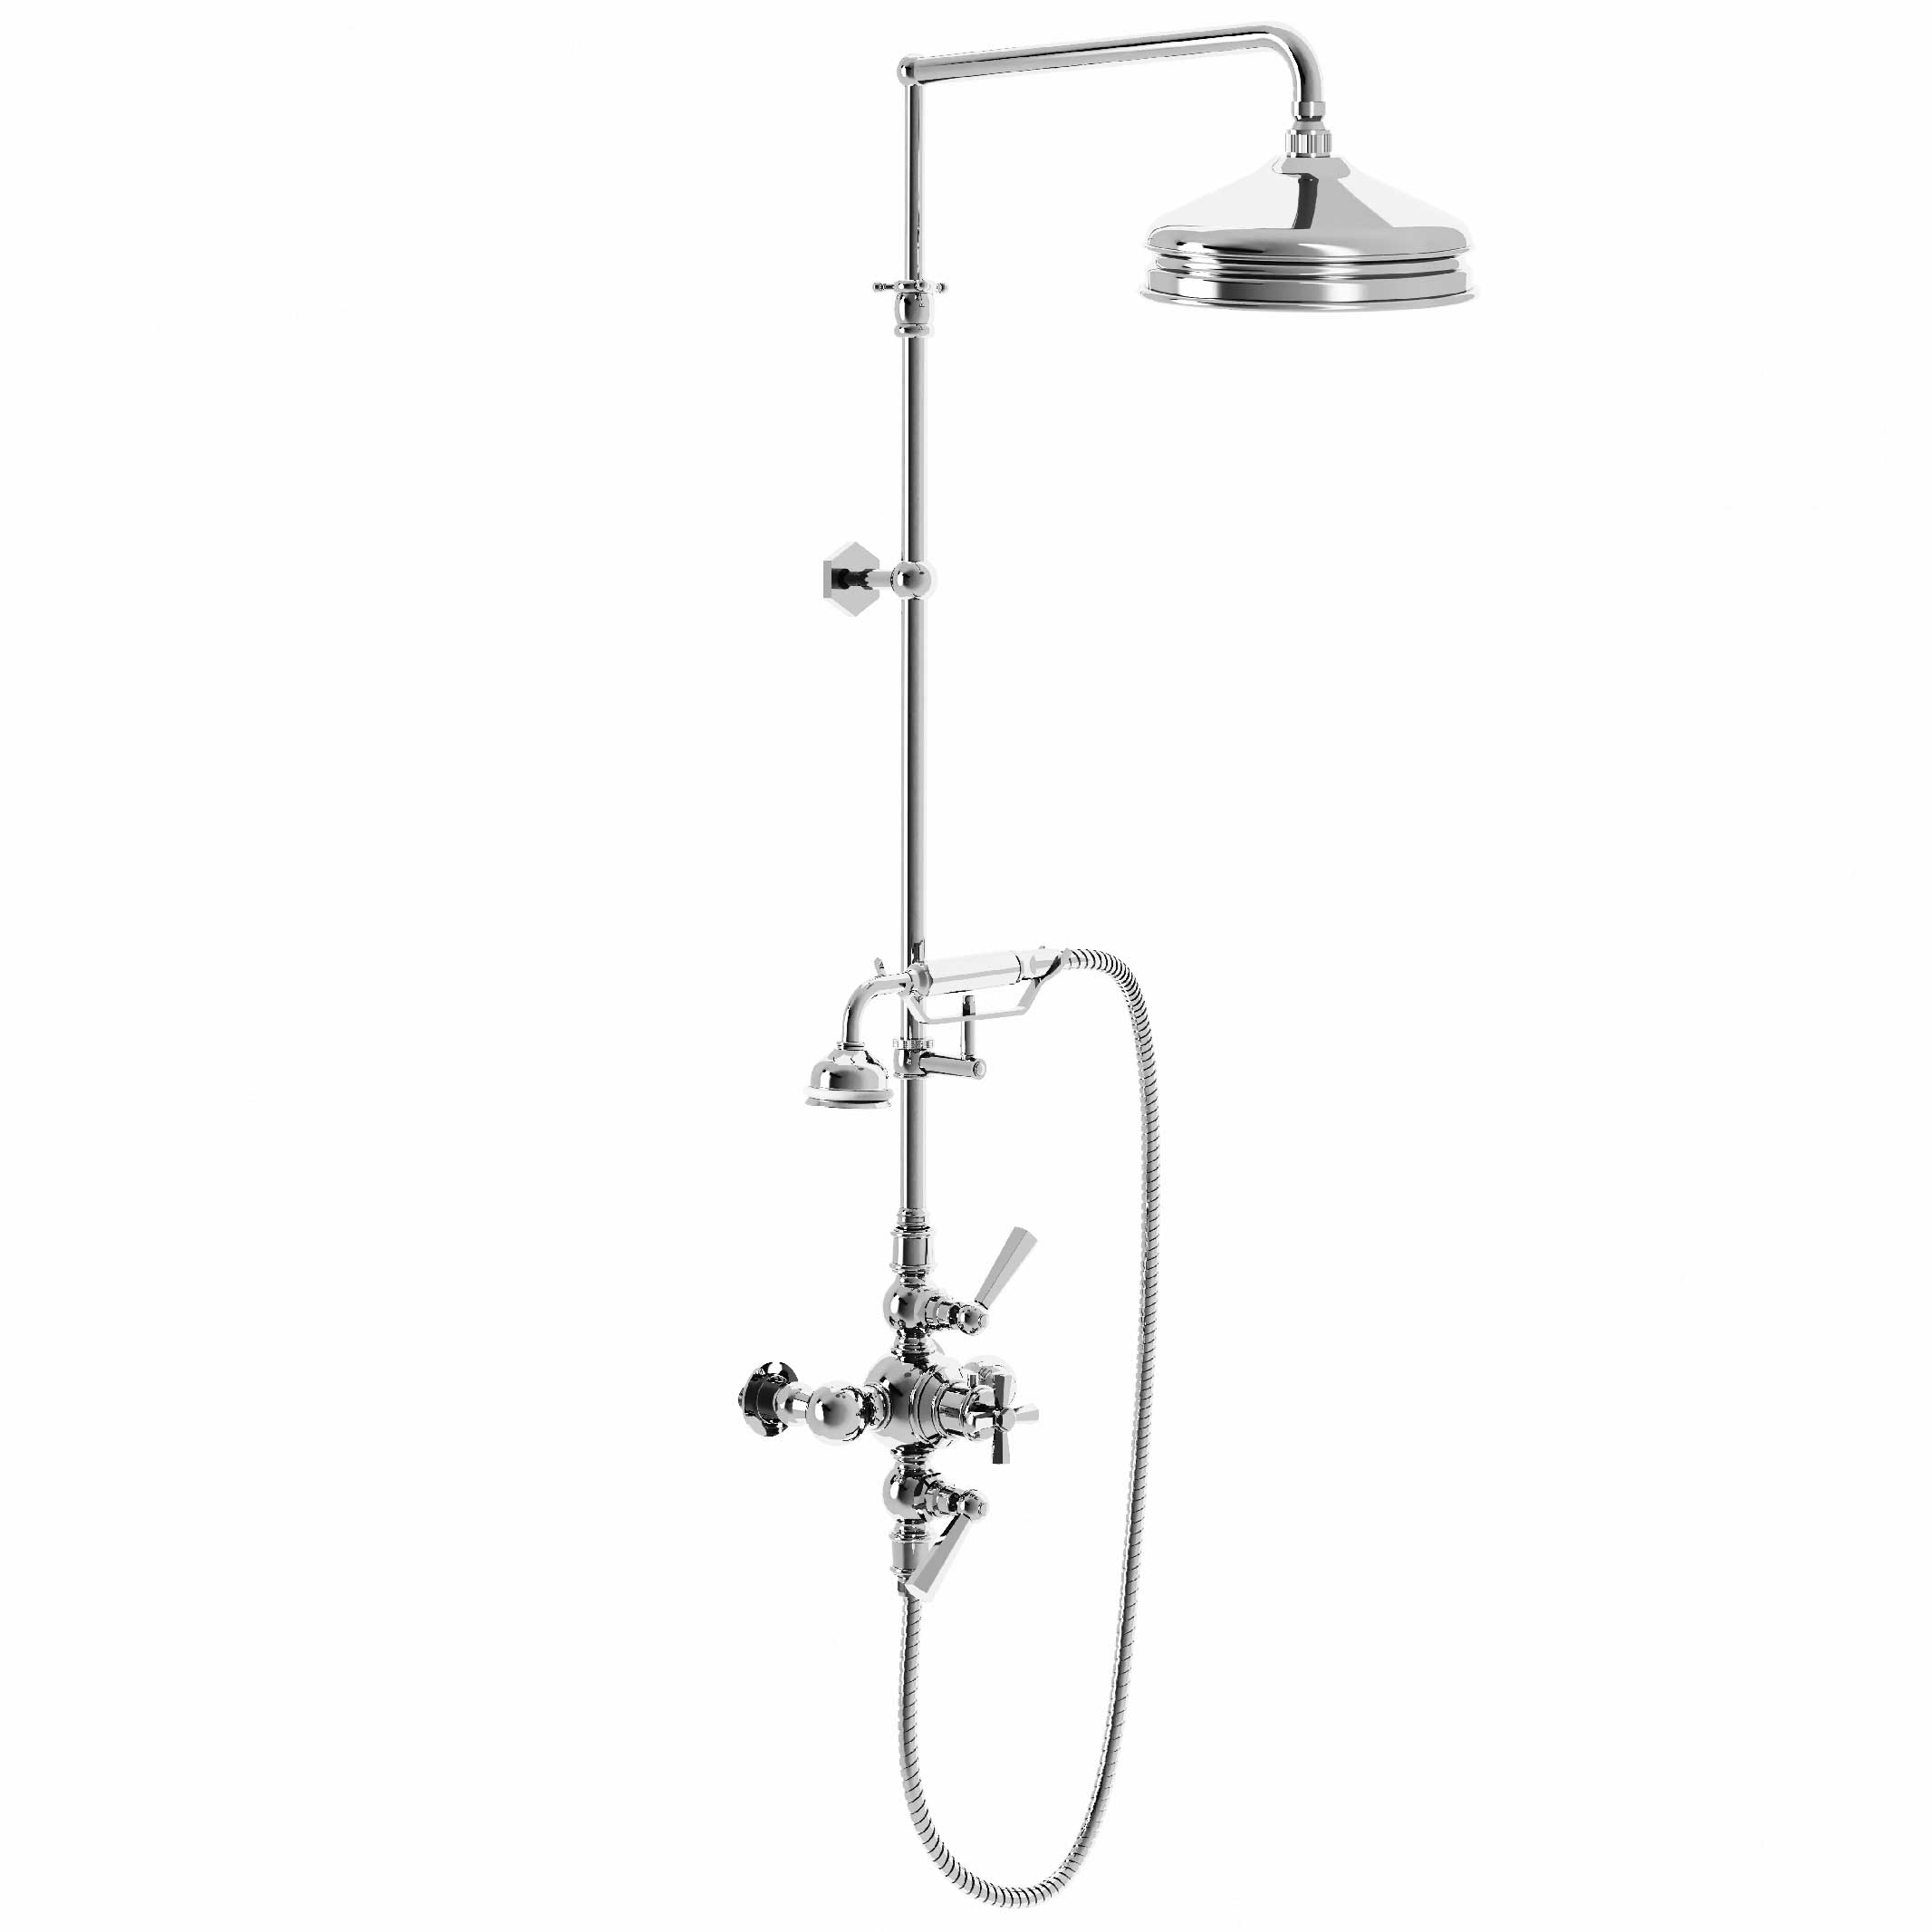 M39-2204T Thermo. shower mixer with column, anti-scaling